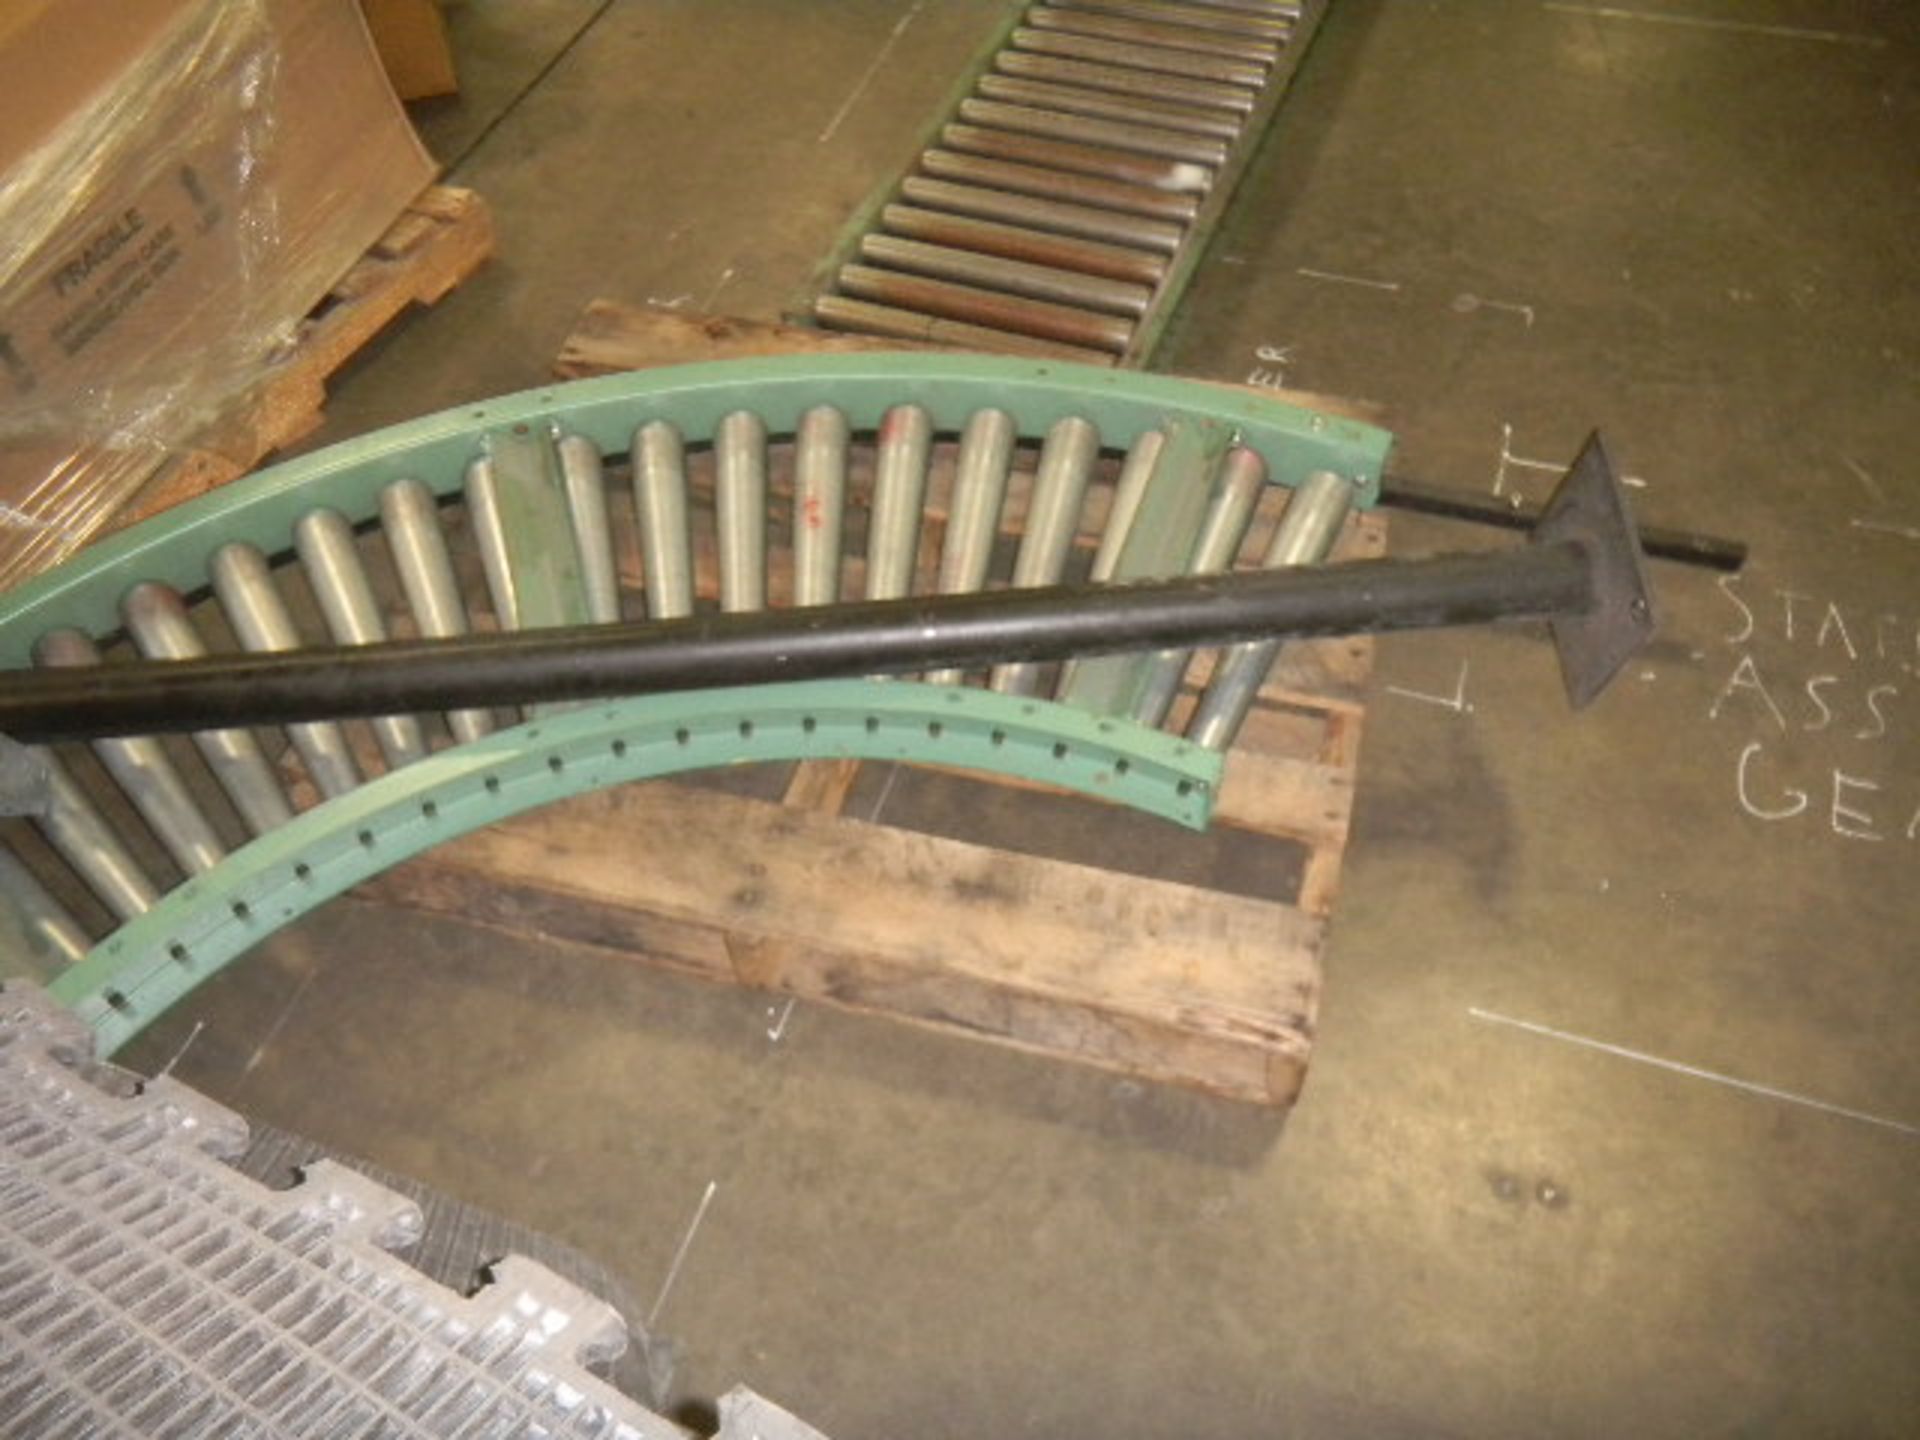 Conveyor System - (11) Pallets of Conveyor Delivery Systems - Sold as (1) UNIT - Image 9 of 9